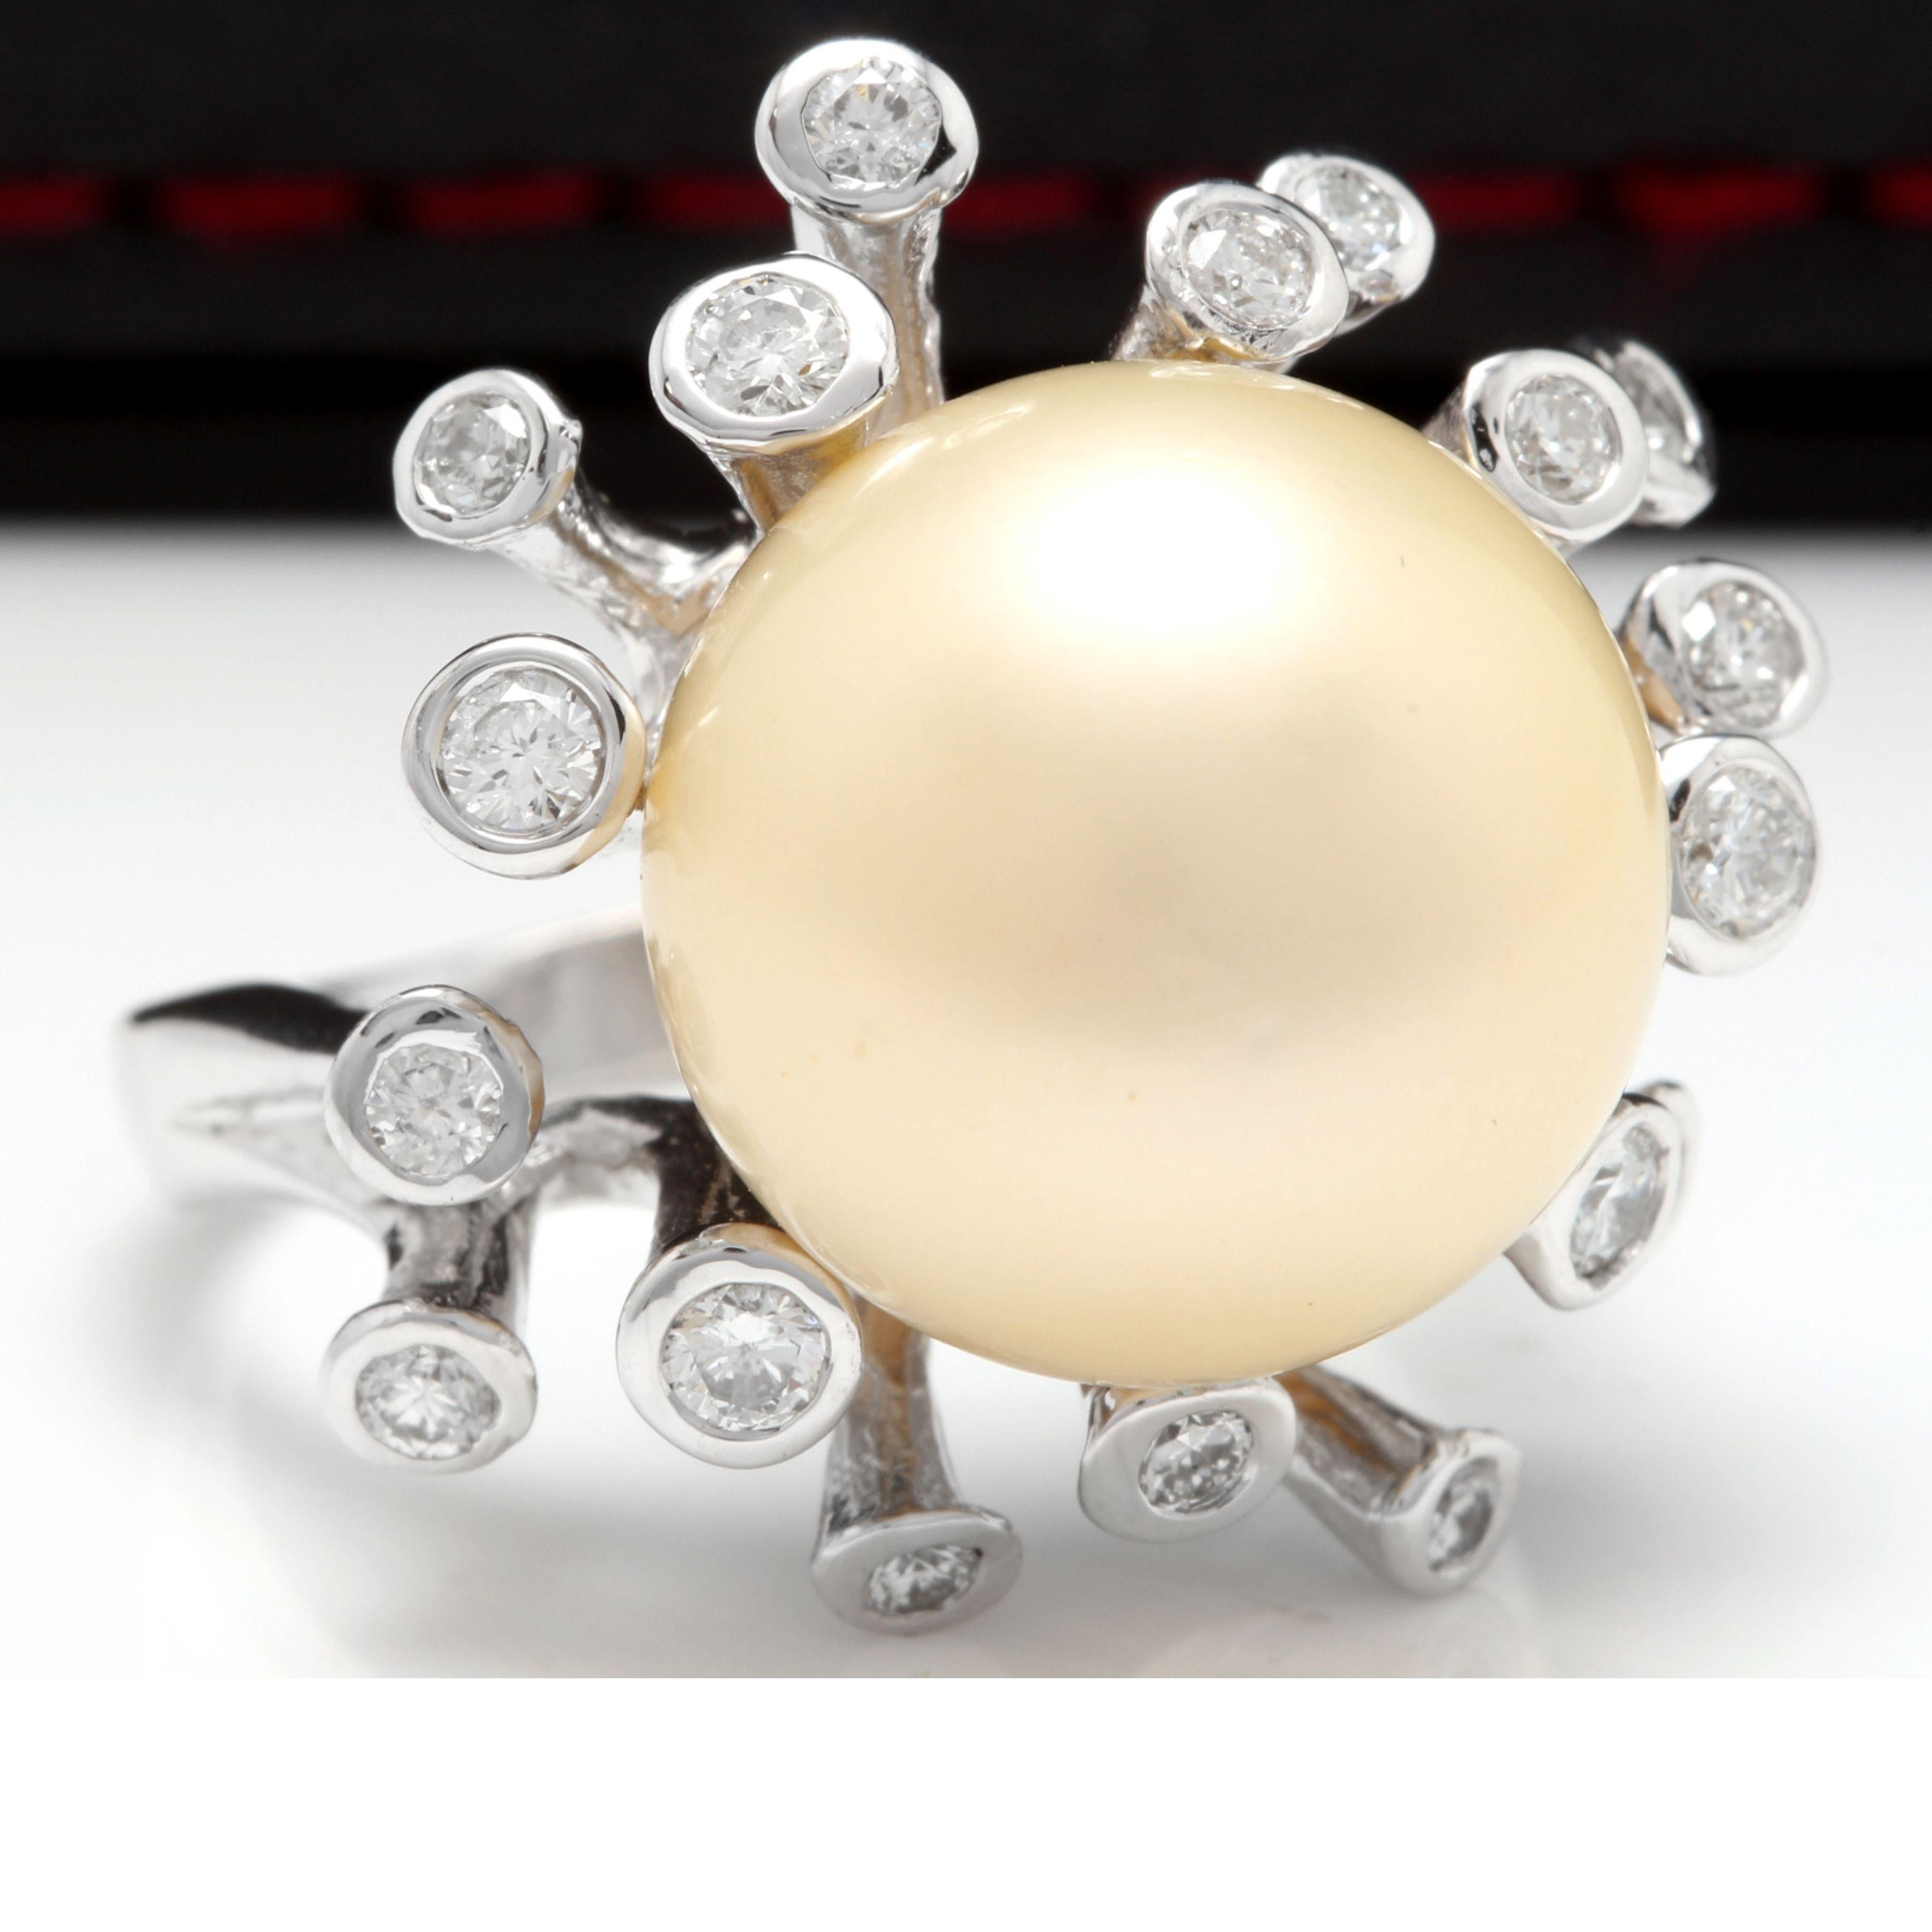 Splendid Natural 15mm South Sea Pearl and Diamond 14K Solid White Gold Ring

Stamped: 14K

Total Natural Pearl Measures: Approx. 15mm

Total Natural Round Diamonds Weight: Approx. 0.80 Carats (color G-H / Clarity SI1-SI2)

Ring size: 7 (we offer